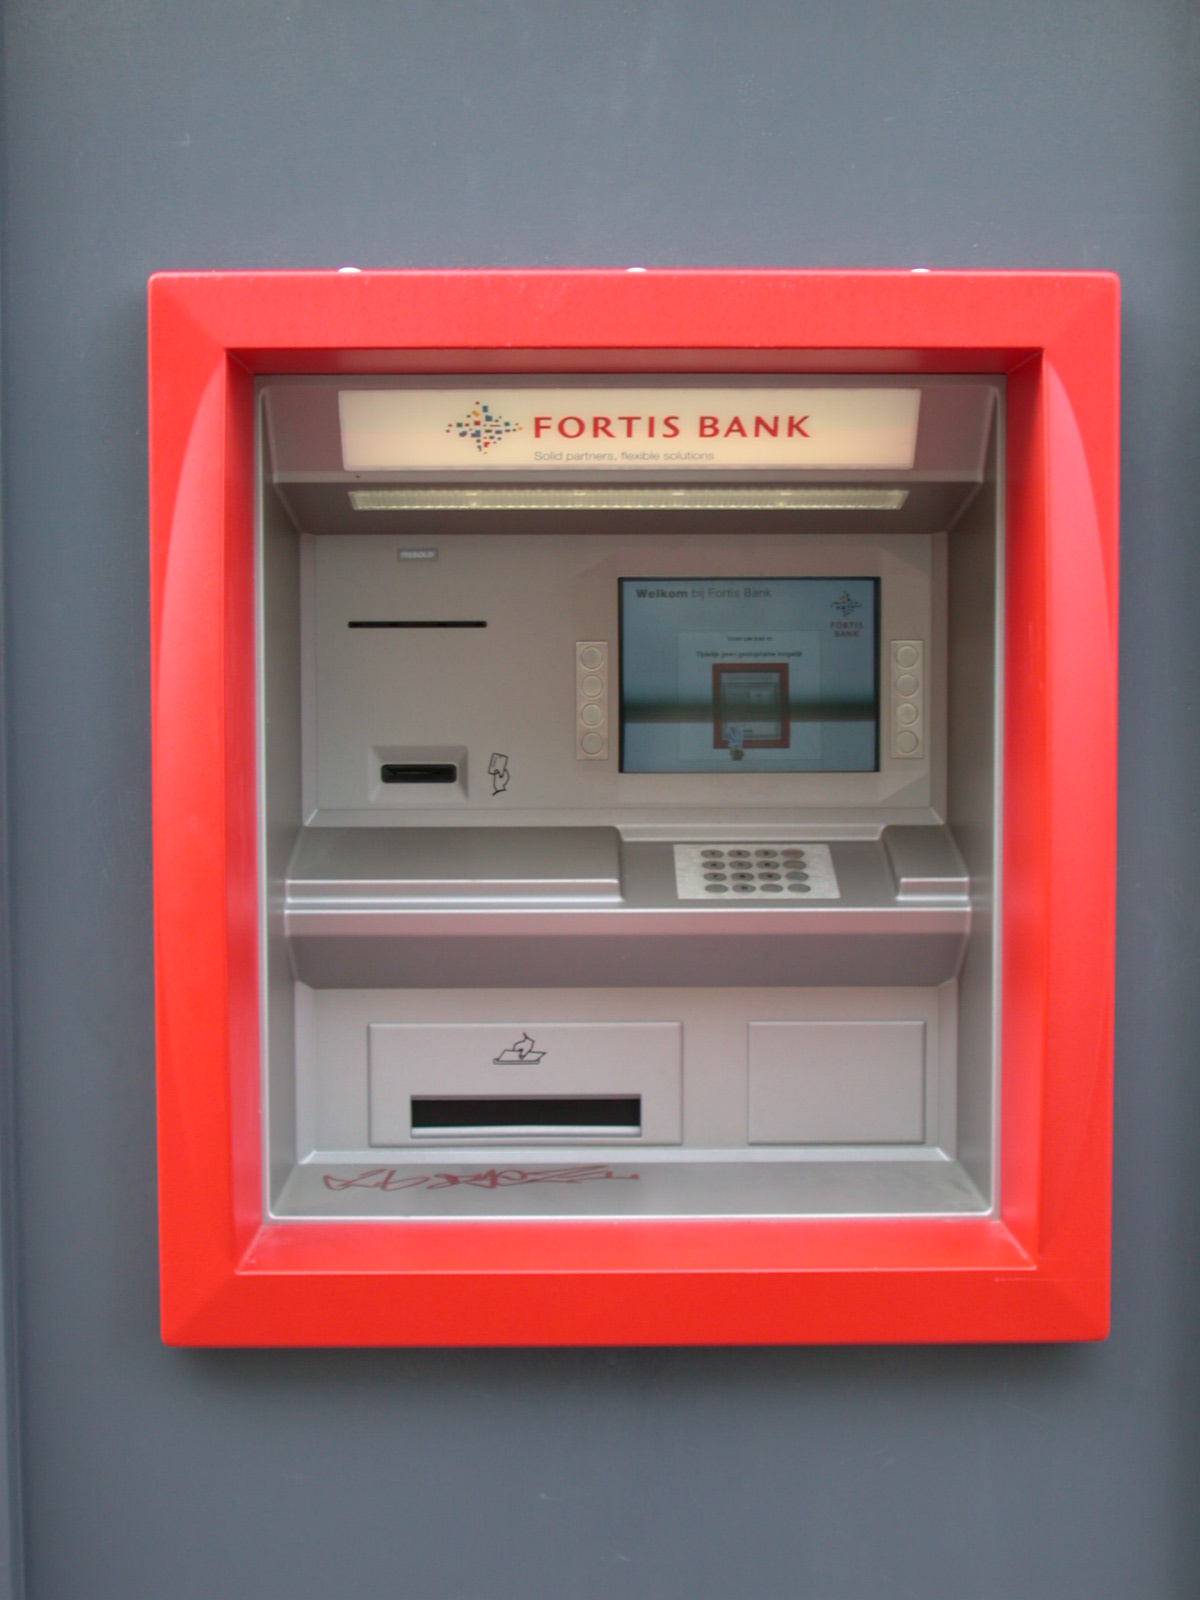 pin machine cash cashpoint fortis bank money out of the wall sqaure